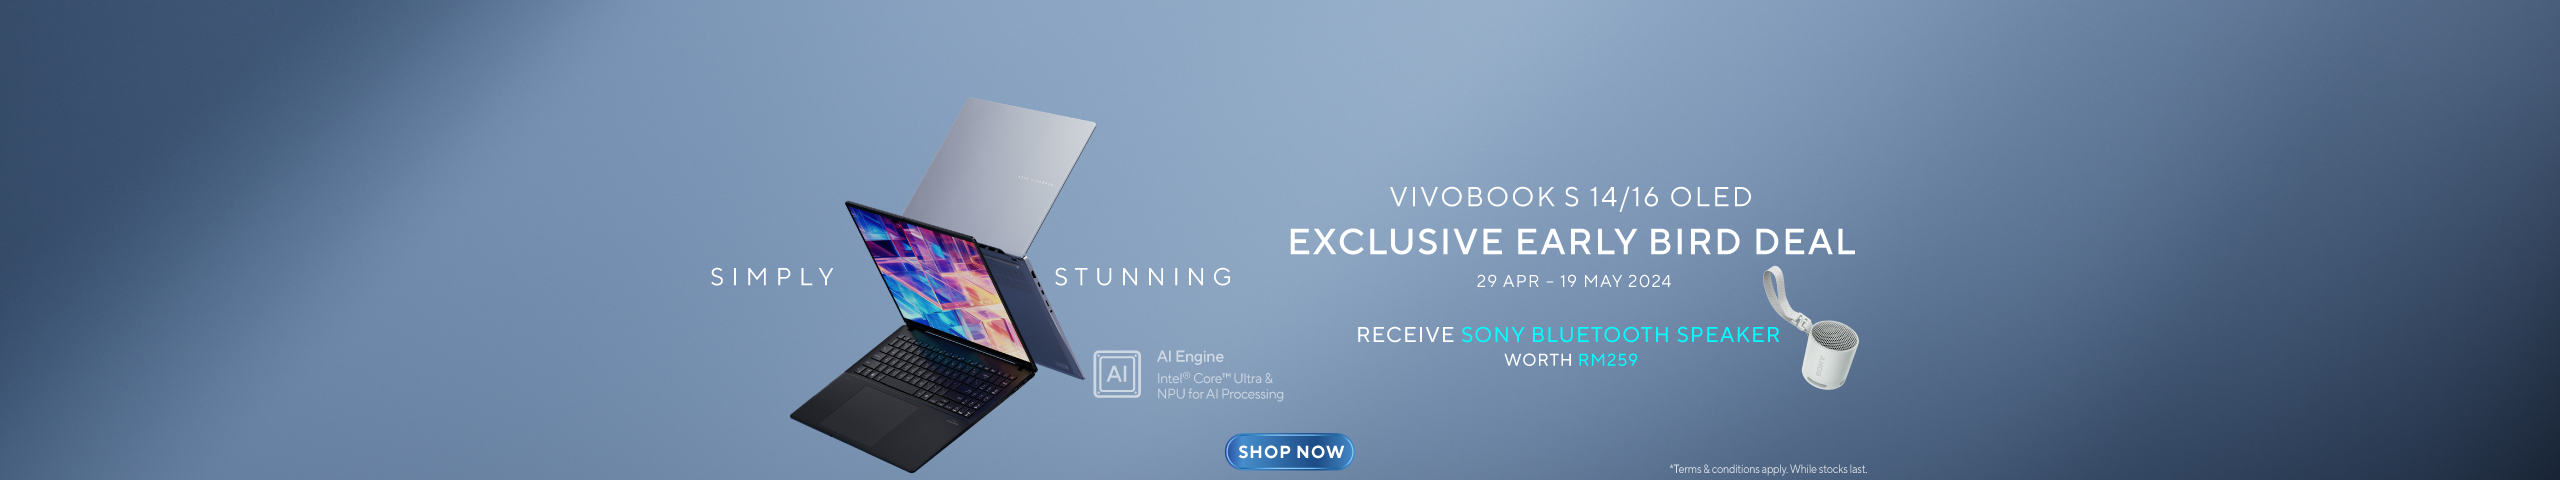 ASUS Vivobook S 14/16 OLED Early Bird Deal, free sony bluetooth speaker worth RM259 with selected asus vivobook S 14 / 16 oled laptop models purchase